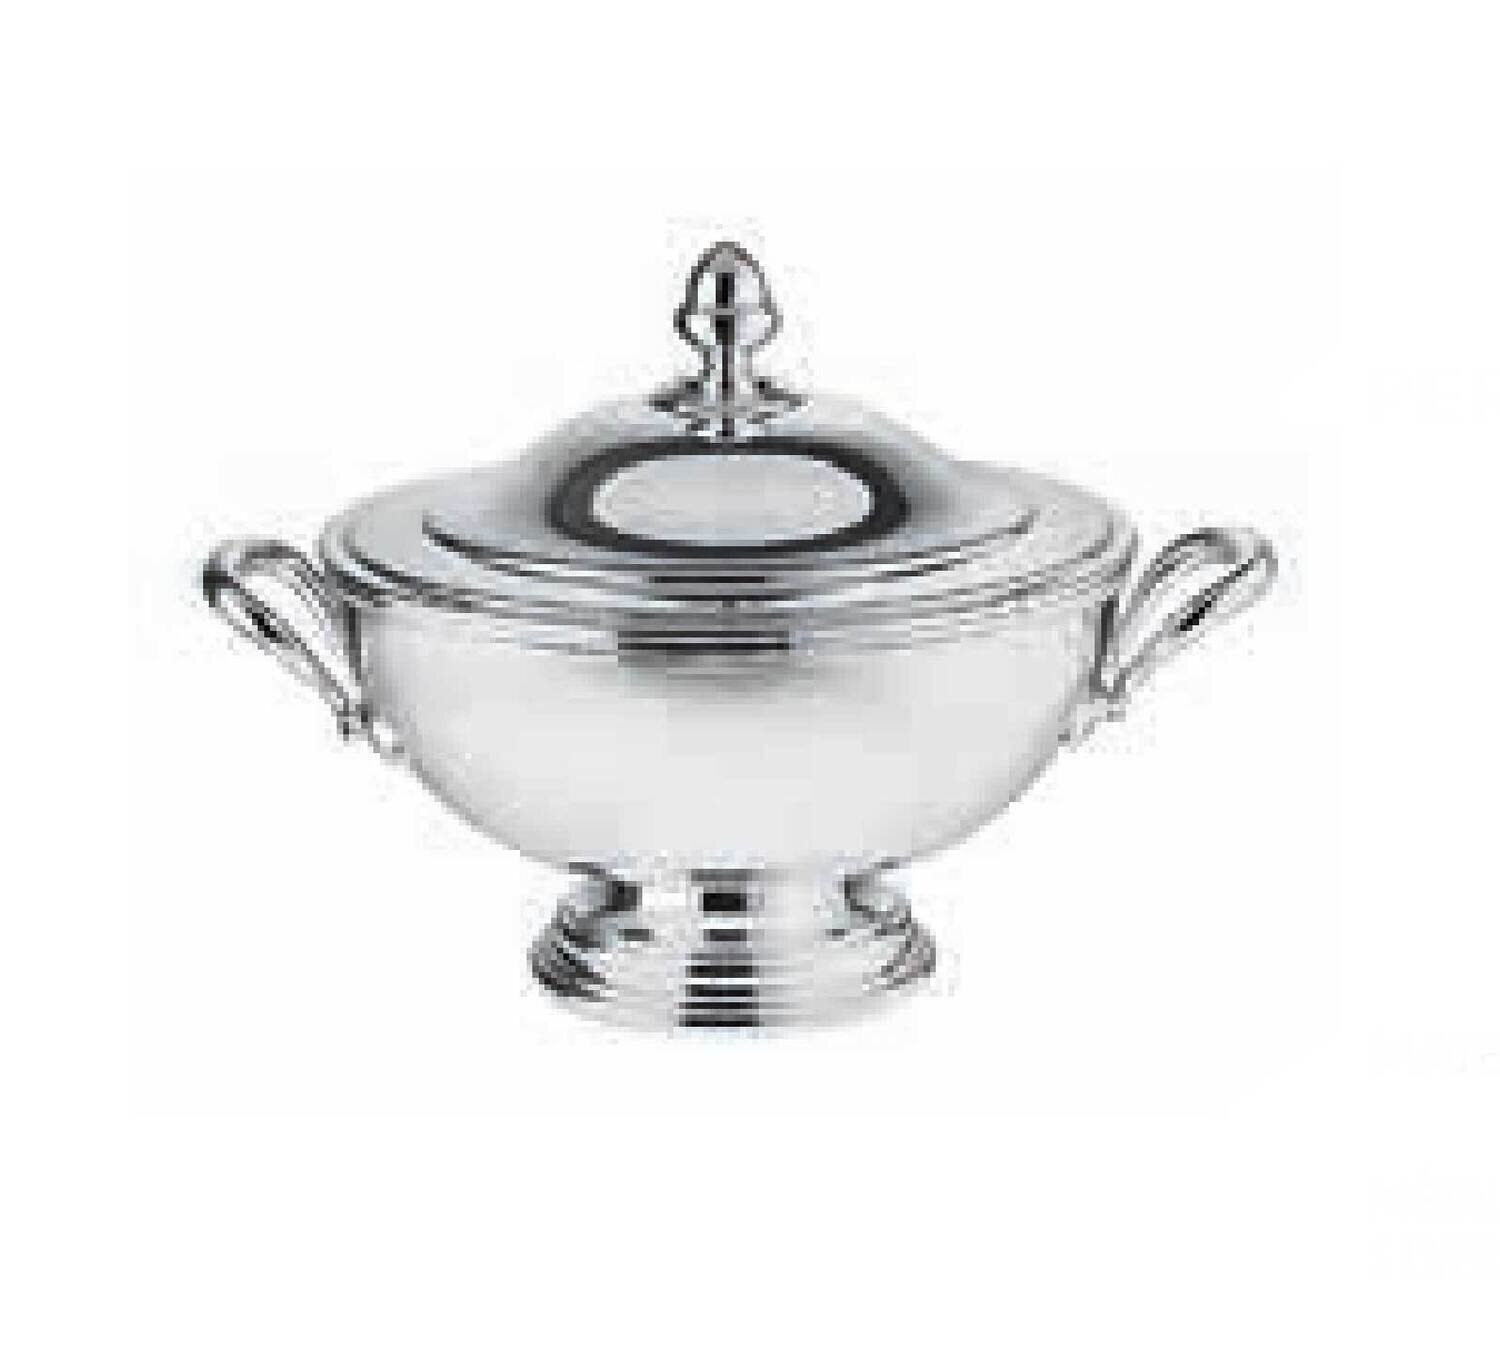 Ercuis Perles Soup Tureen 8.25 Inch Silver Plated F51P200-20